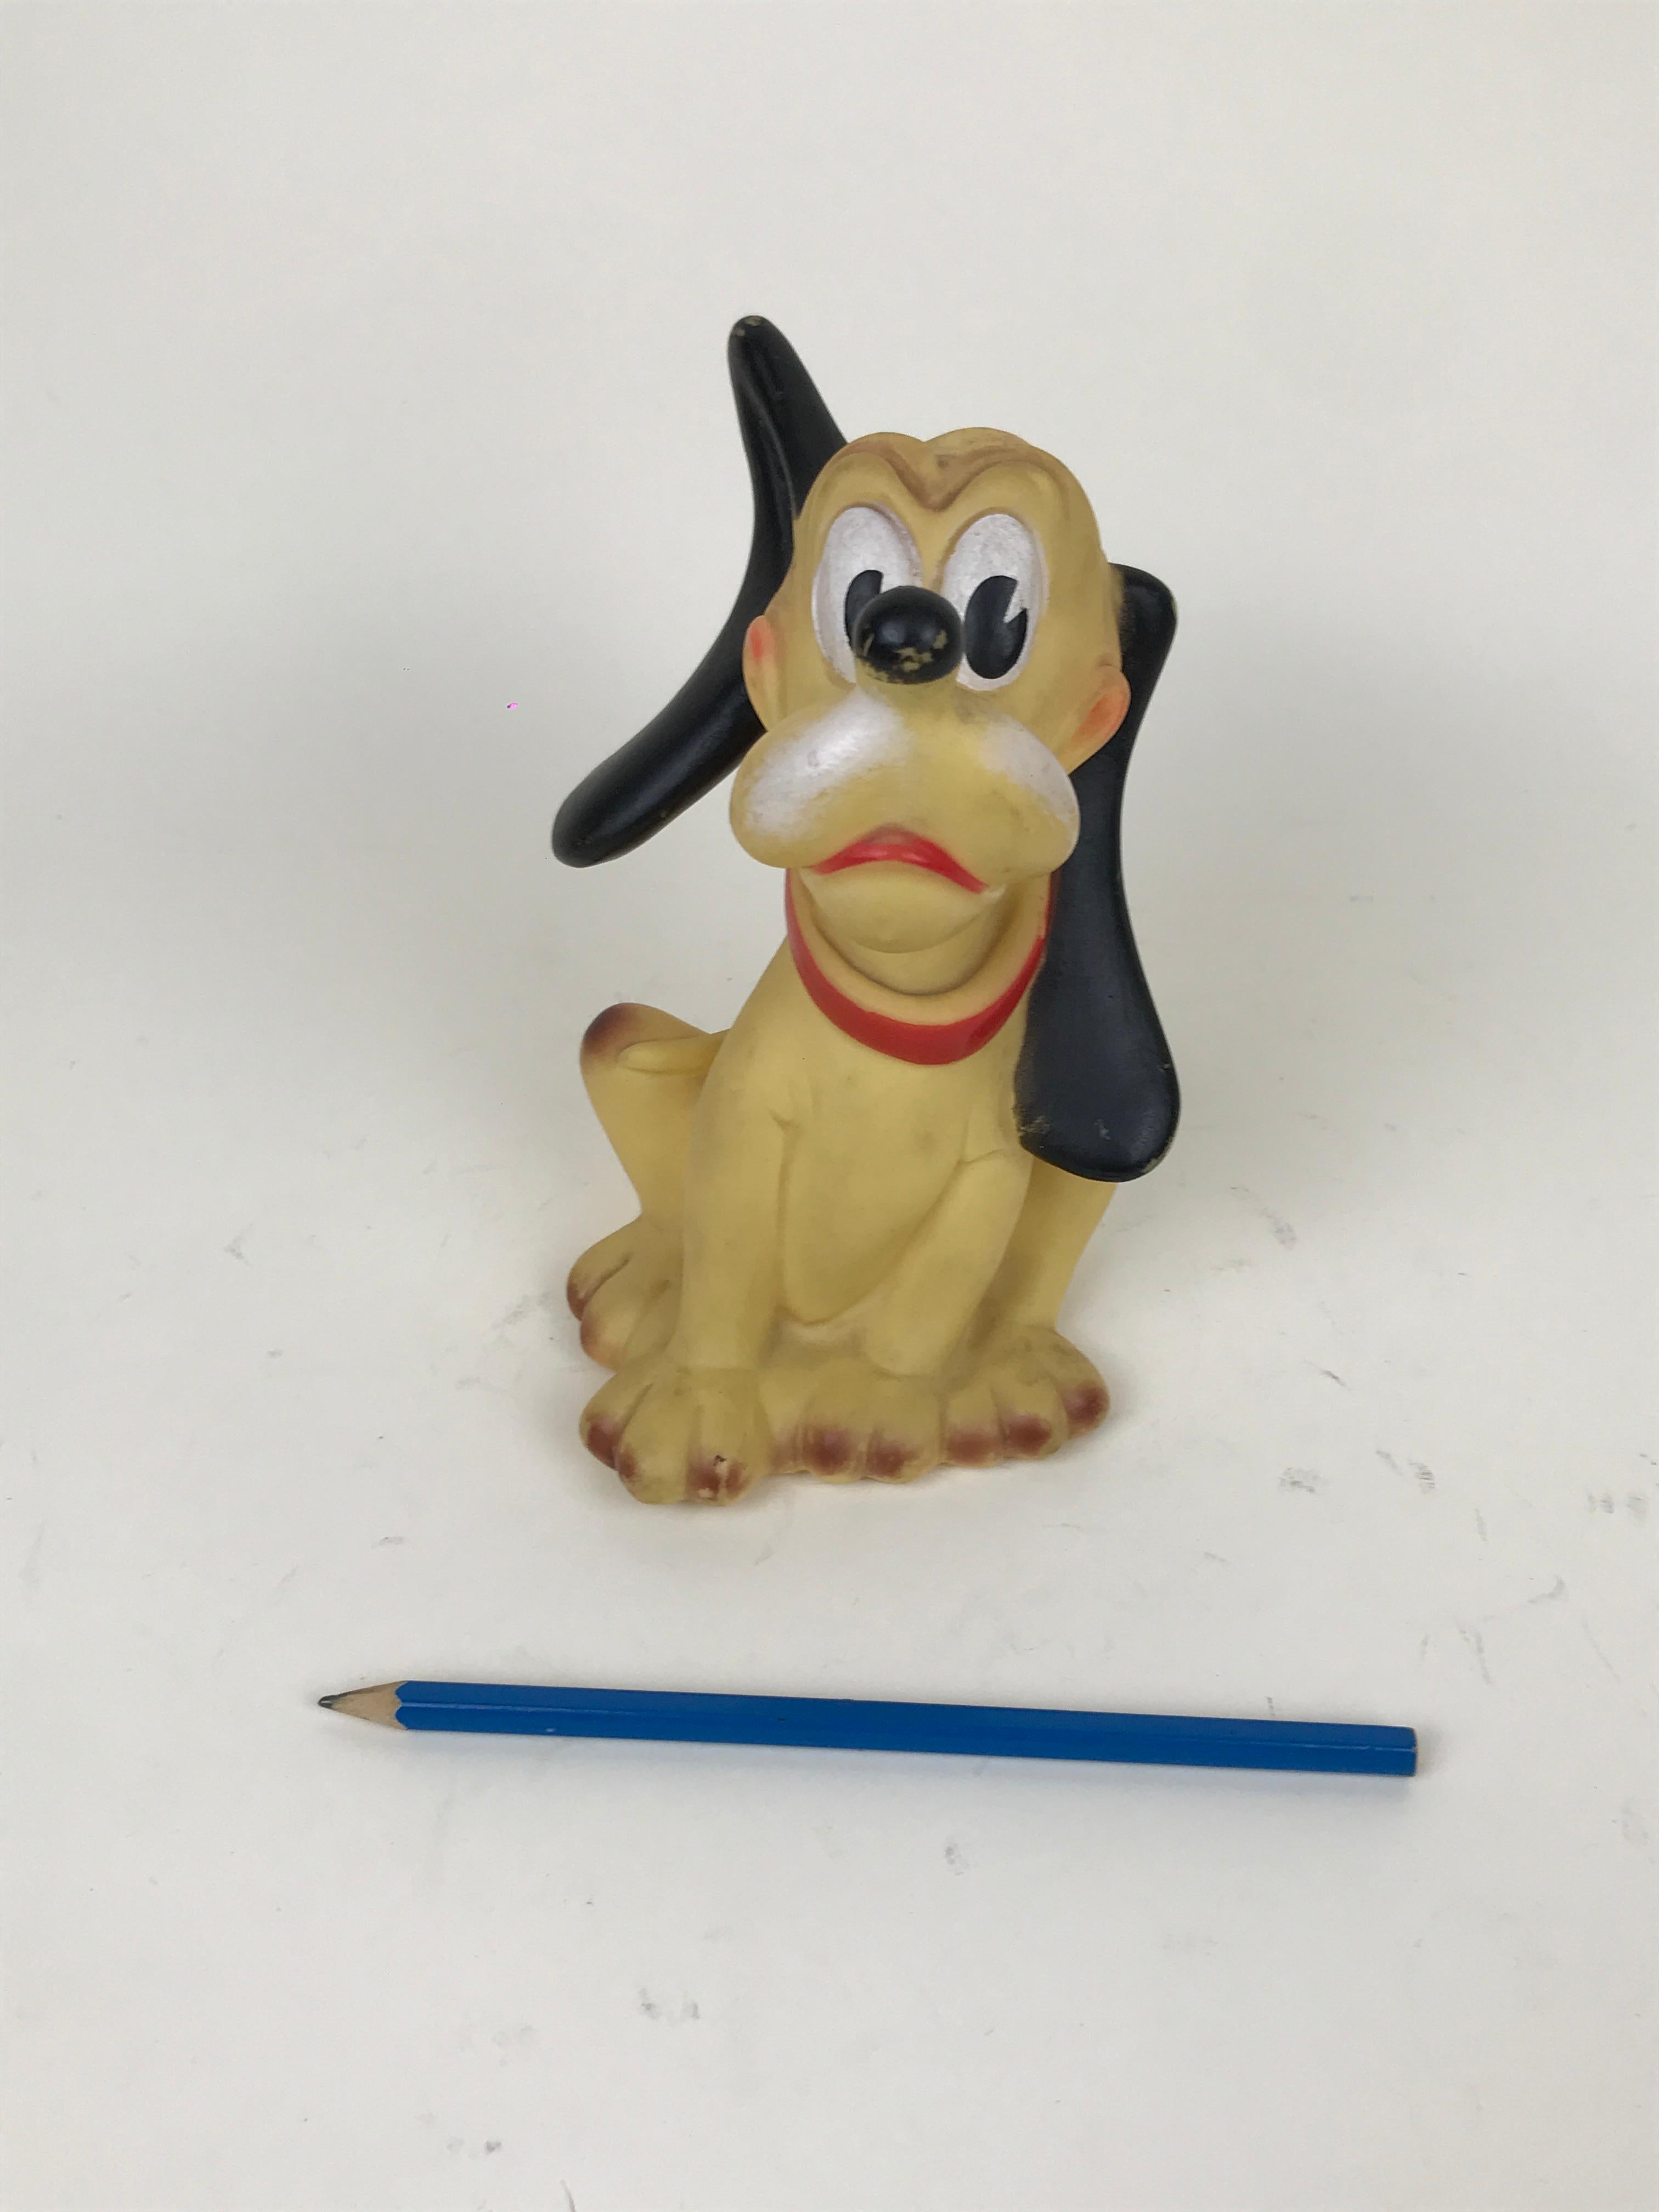 Vintage Pluto the pup squeak rubber toy made by Ledraplastic Italy in the 1960s.

This Pluto toy has a peculiar asymmetric position of the ears making it particularly collectible. 

Marked Walt Disney Production on the bottom and stamped with